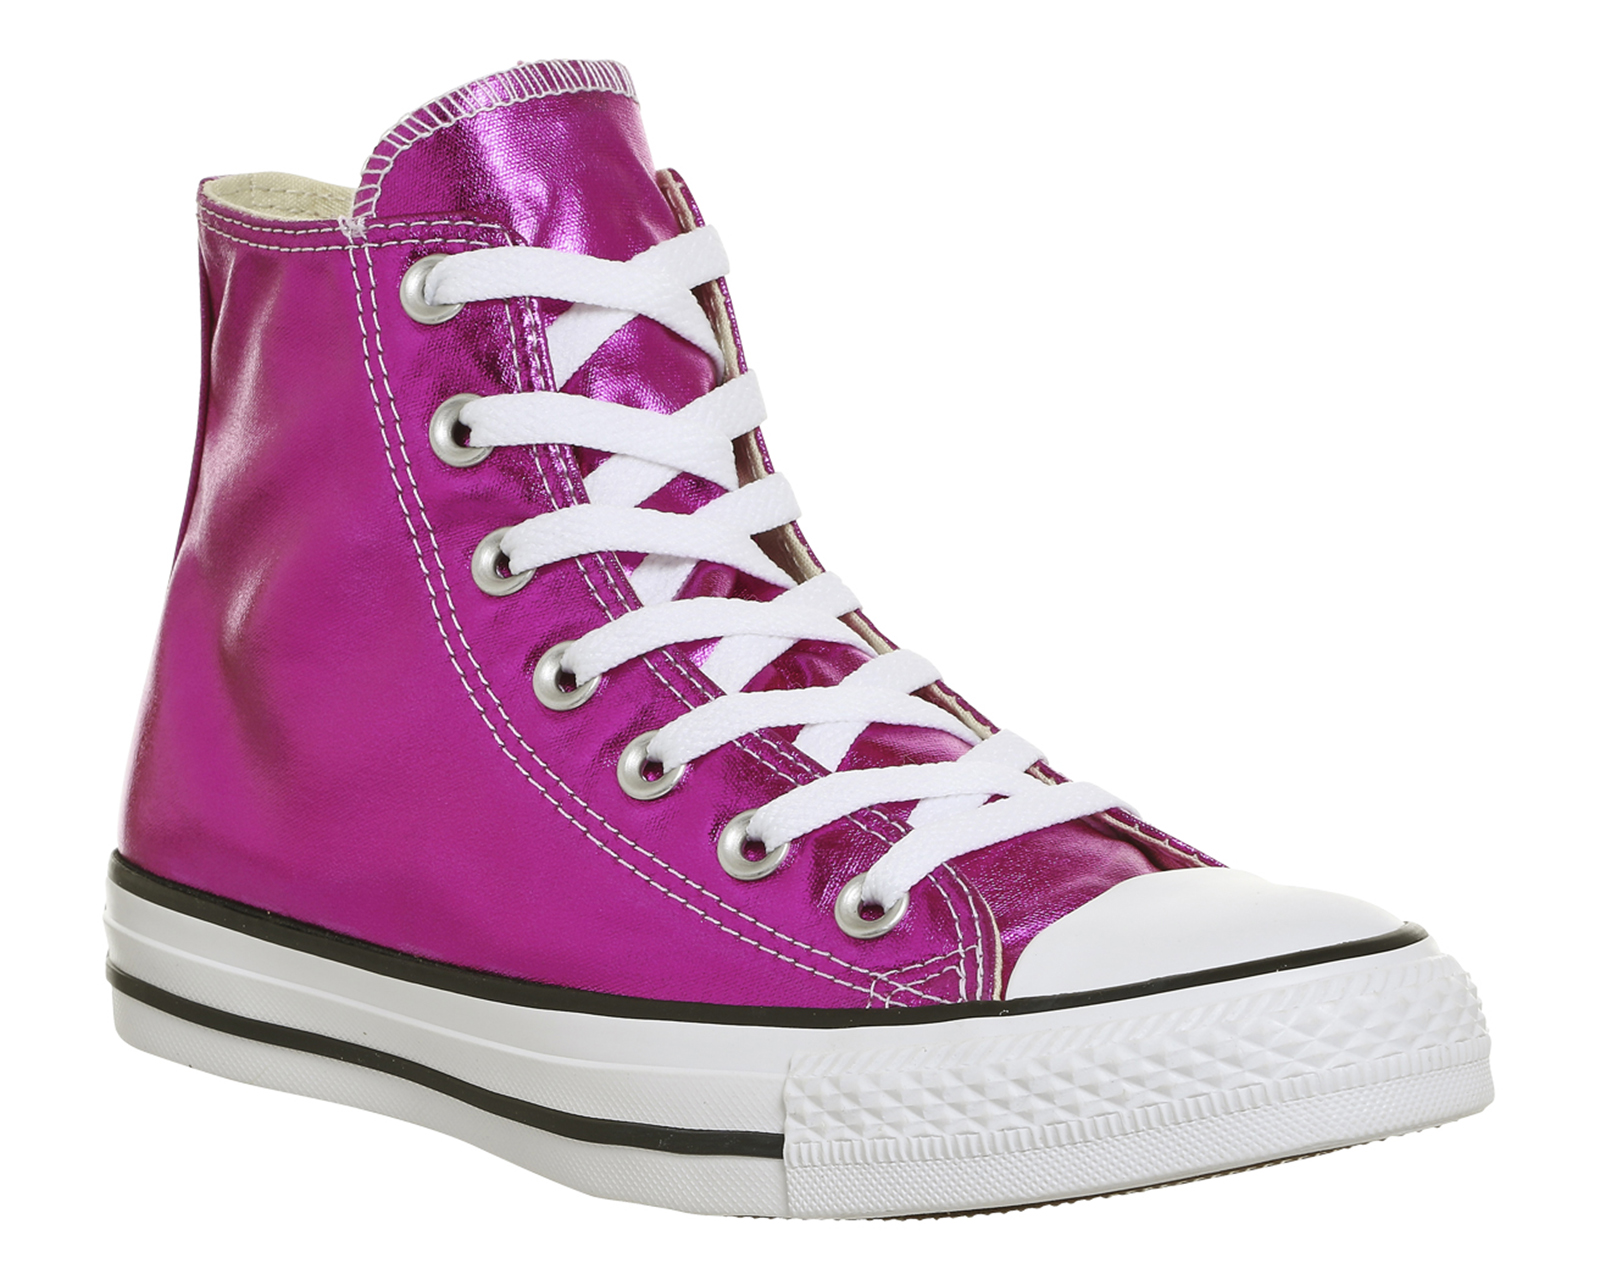 Converse All Star Magenta Top Sellers, UP TO 68% OFF |  www.editorialelpirata.com